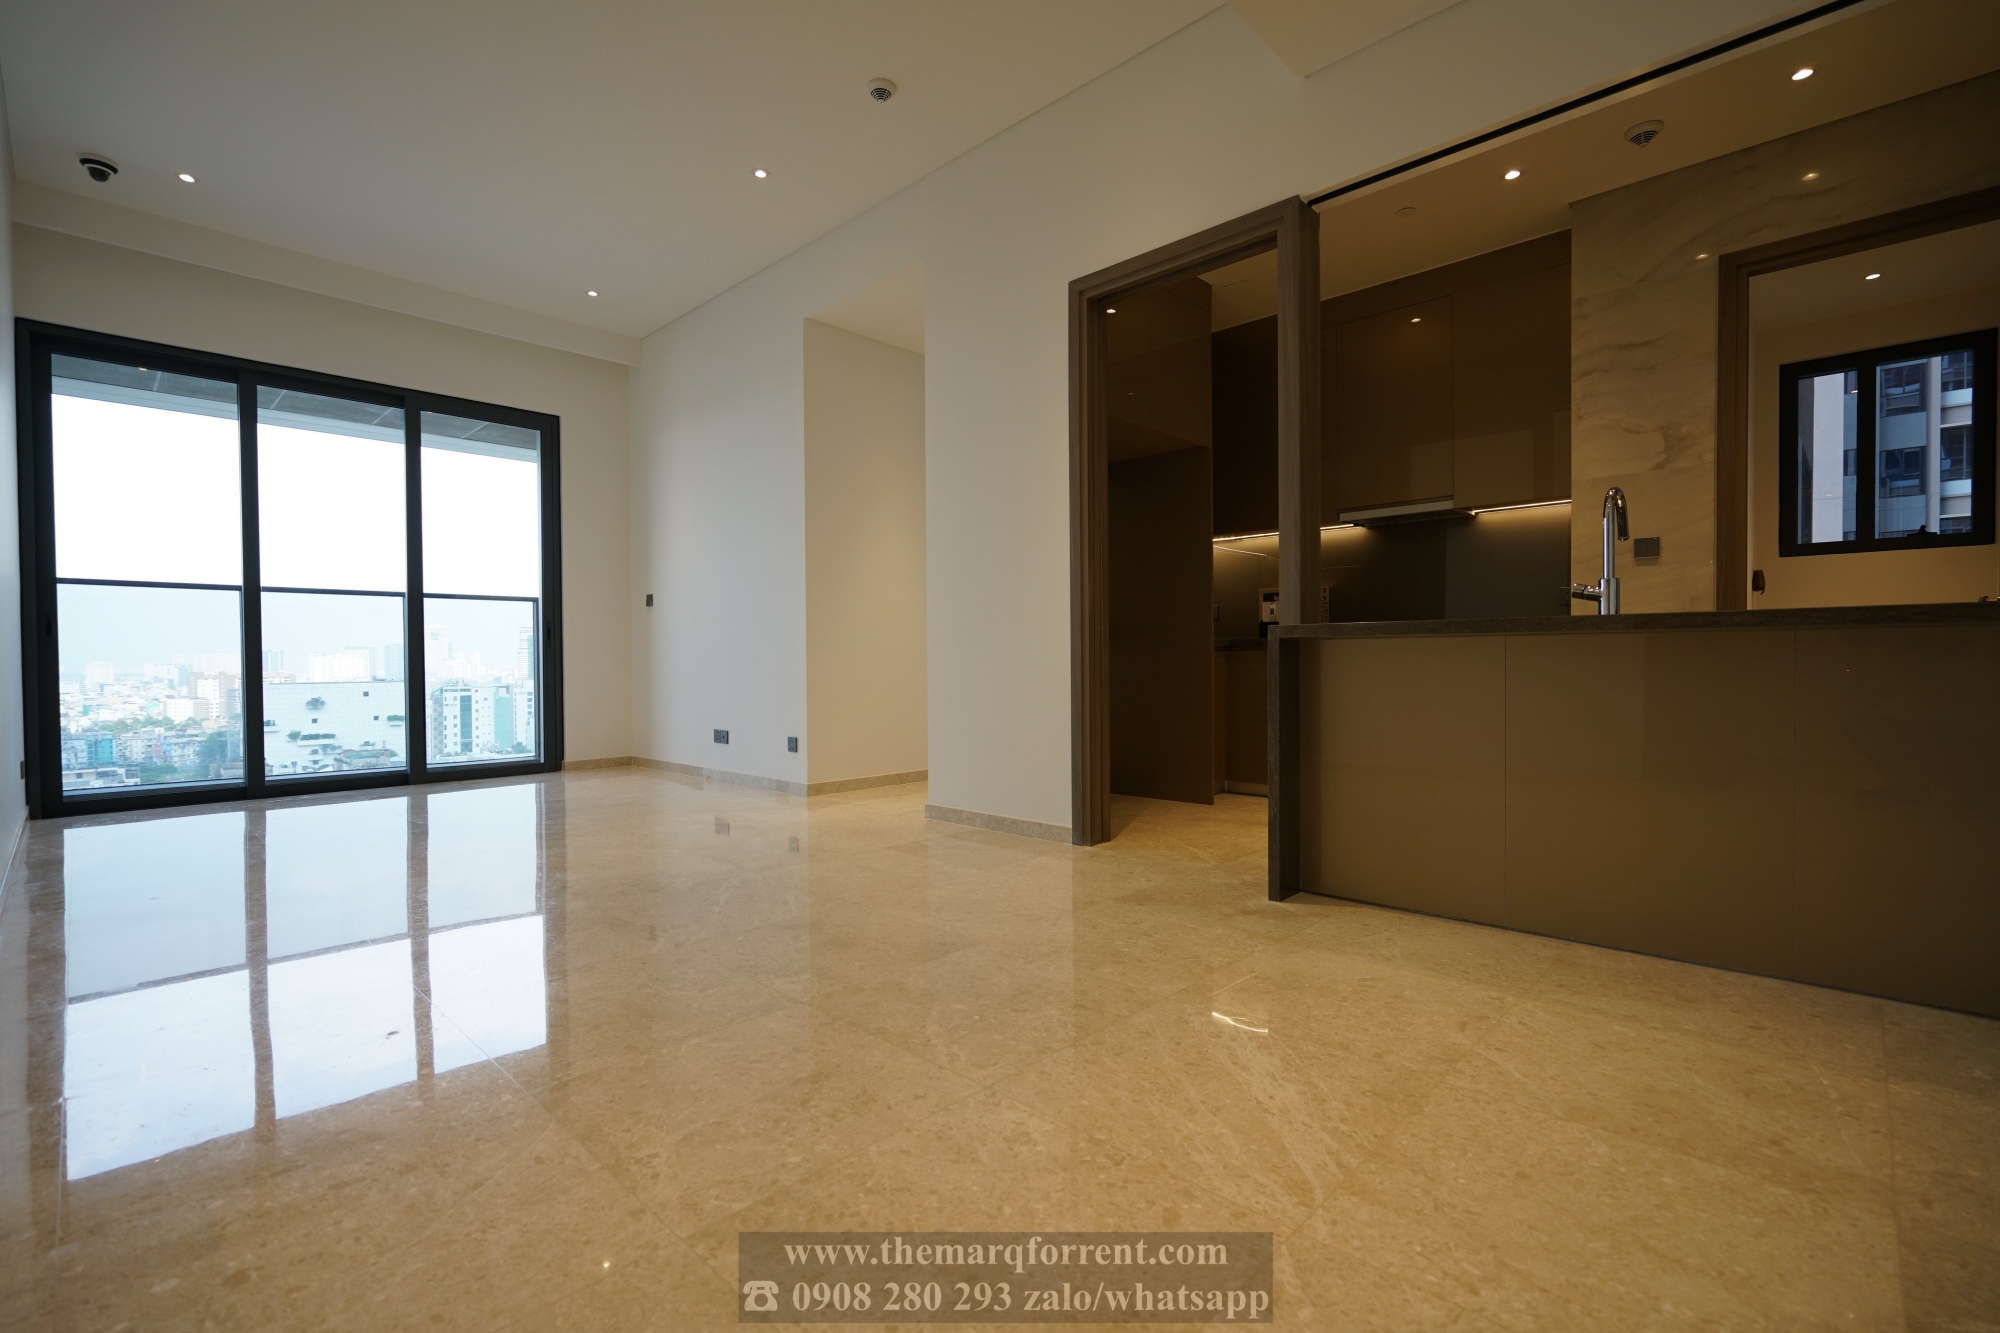 Unfurnished 3 bedroom apartment for rent in The Marq with nice layout